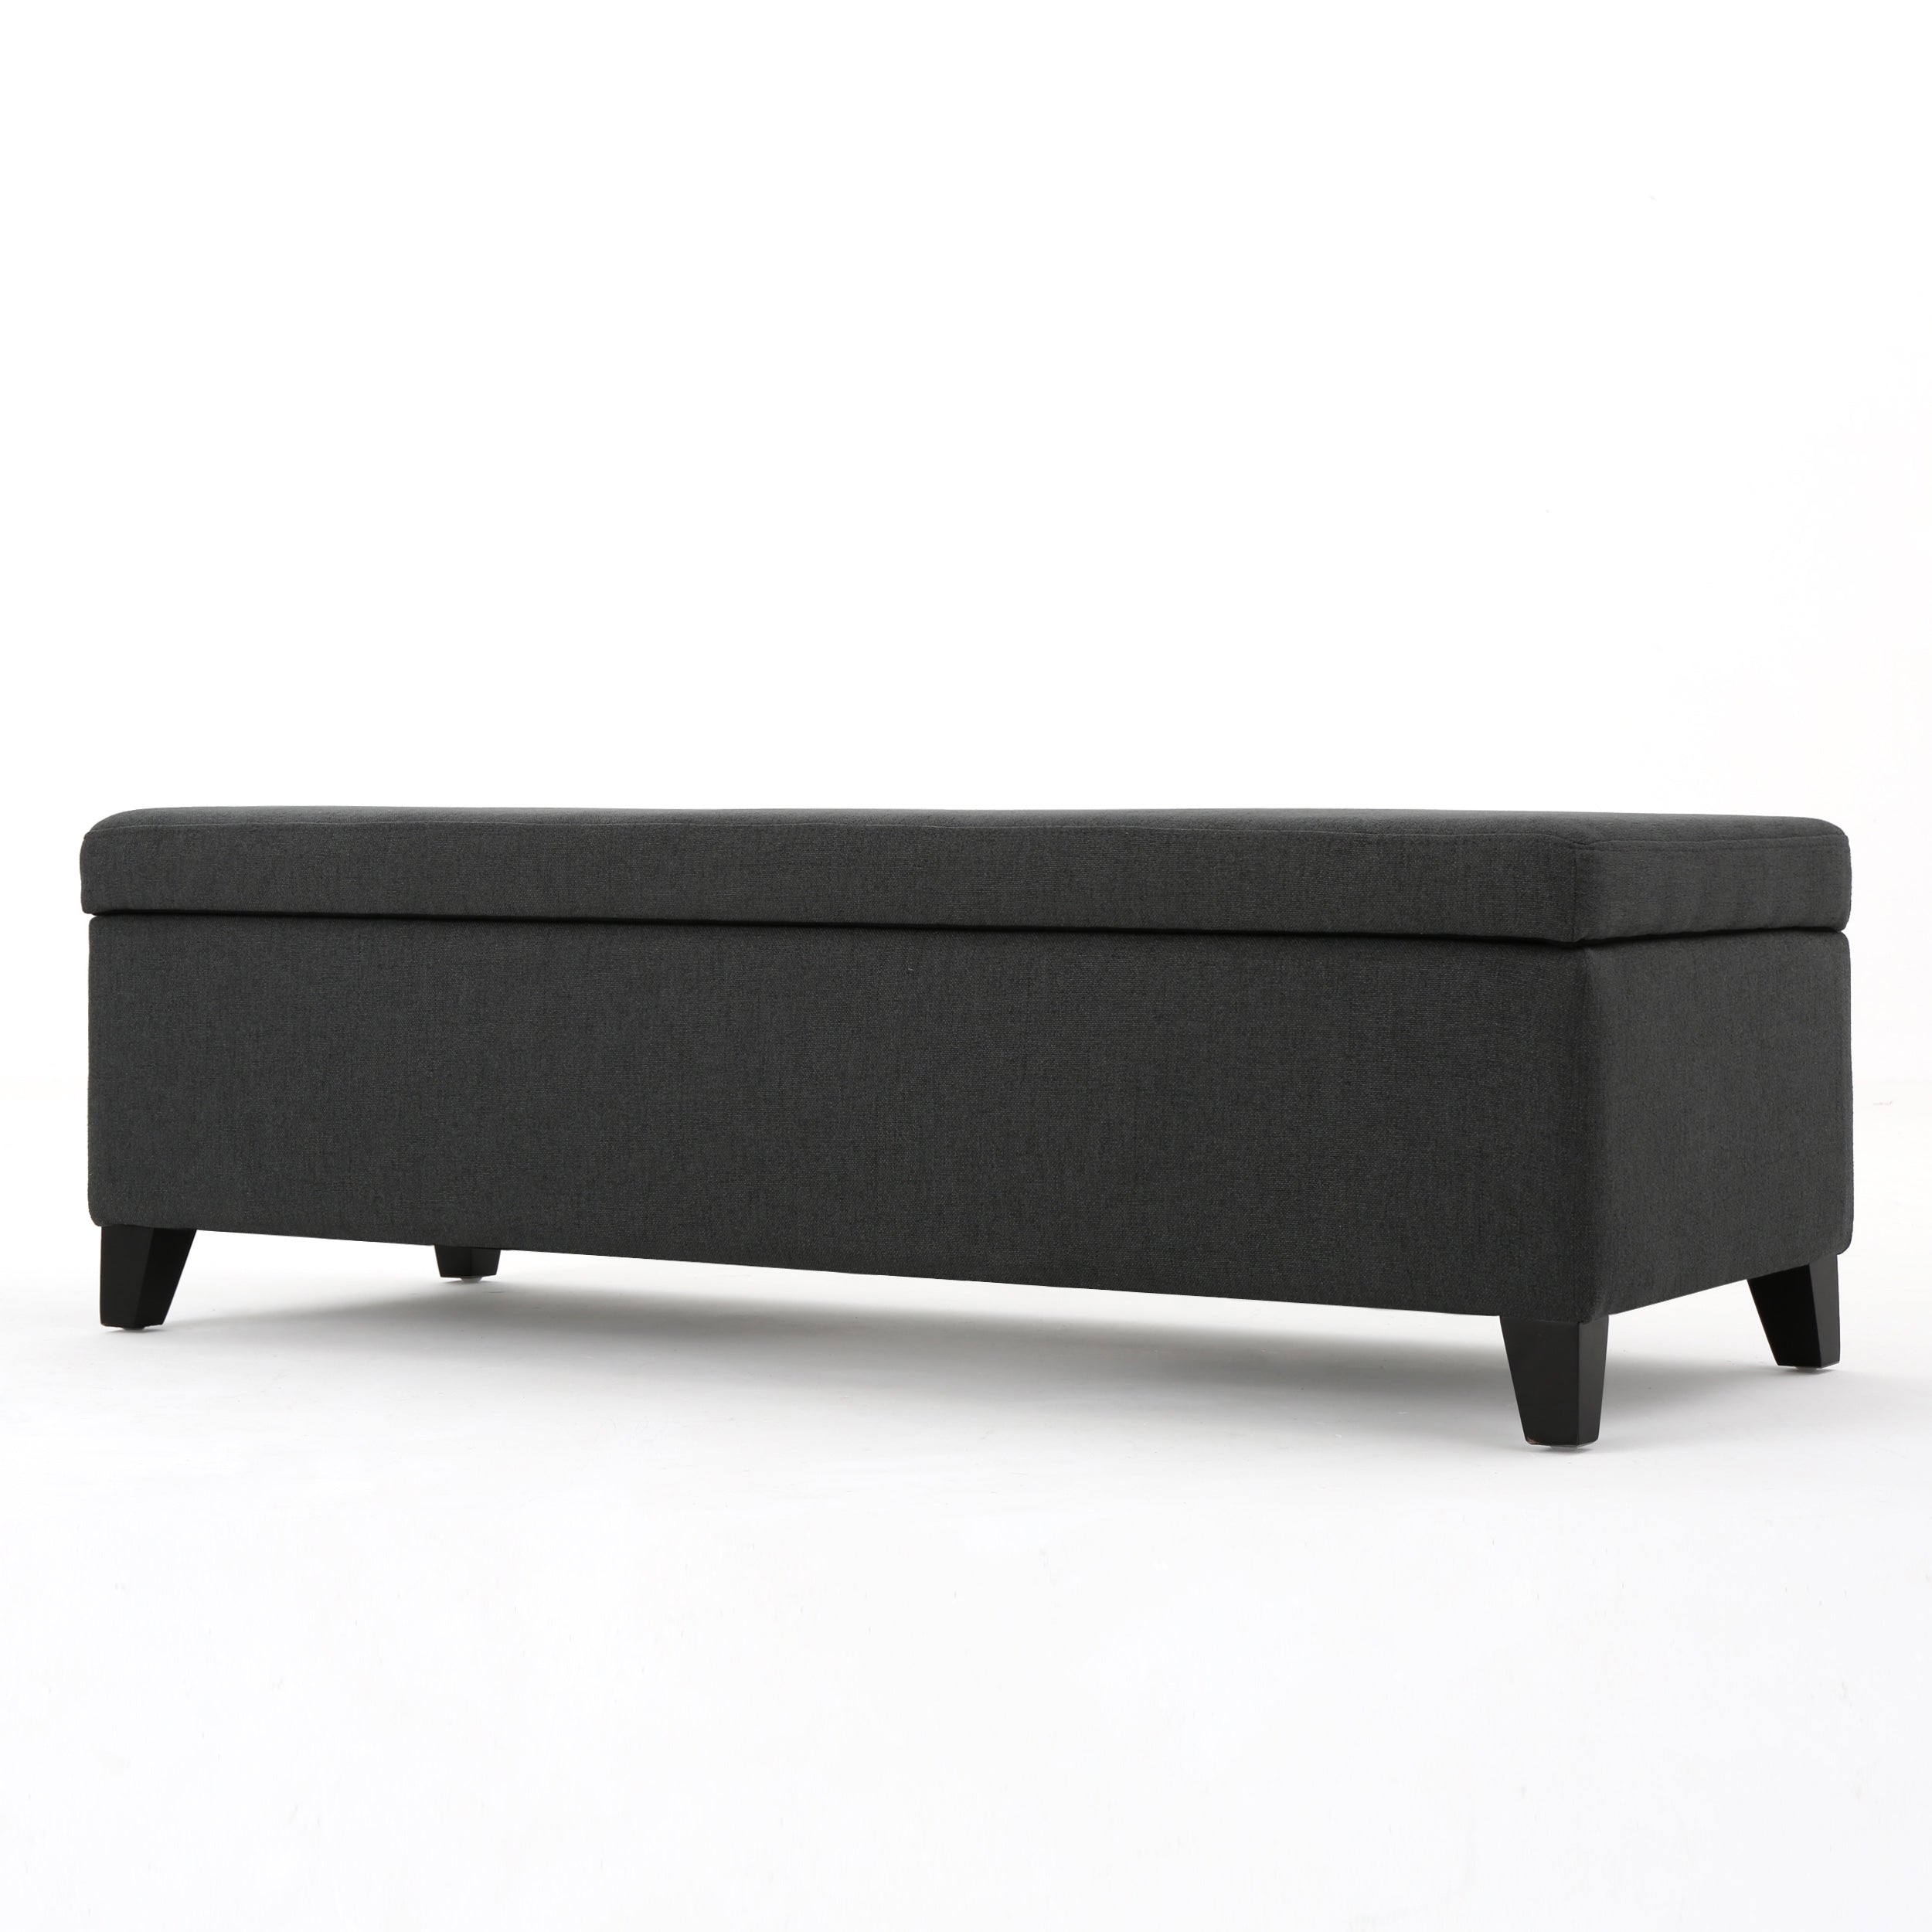 Annis Rectangle Fabric Storage Ottoman Bench Navy Blue